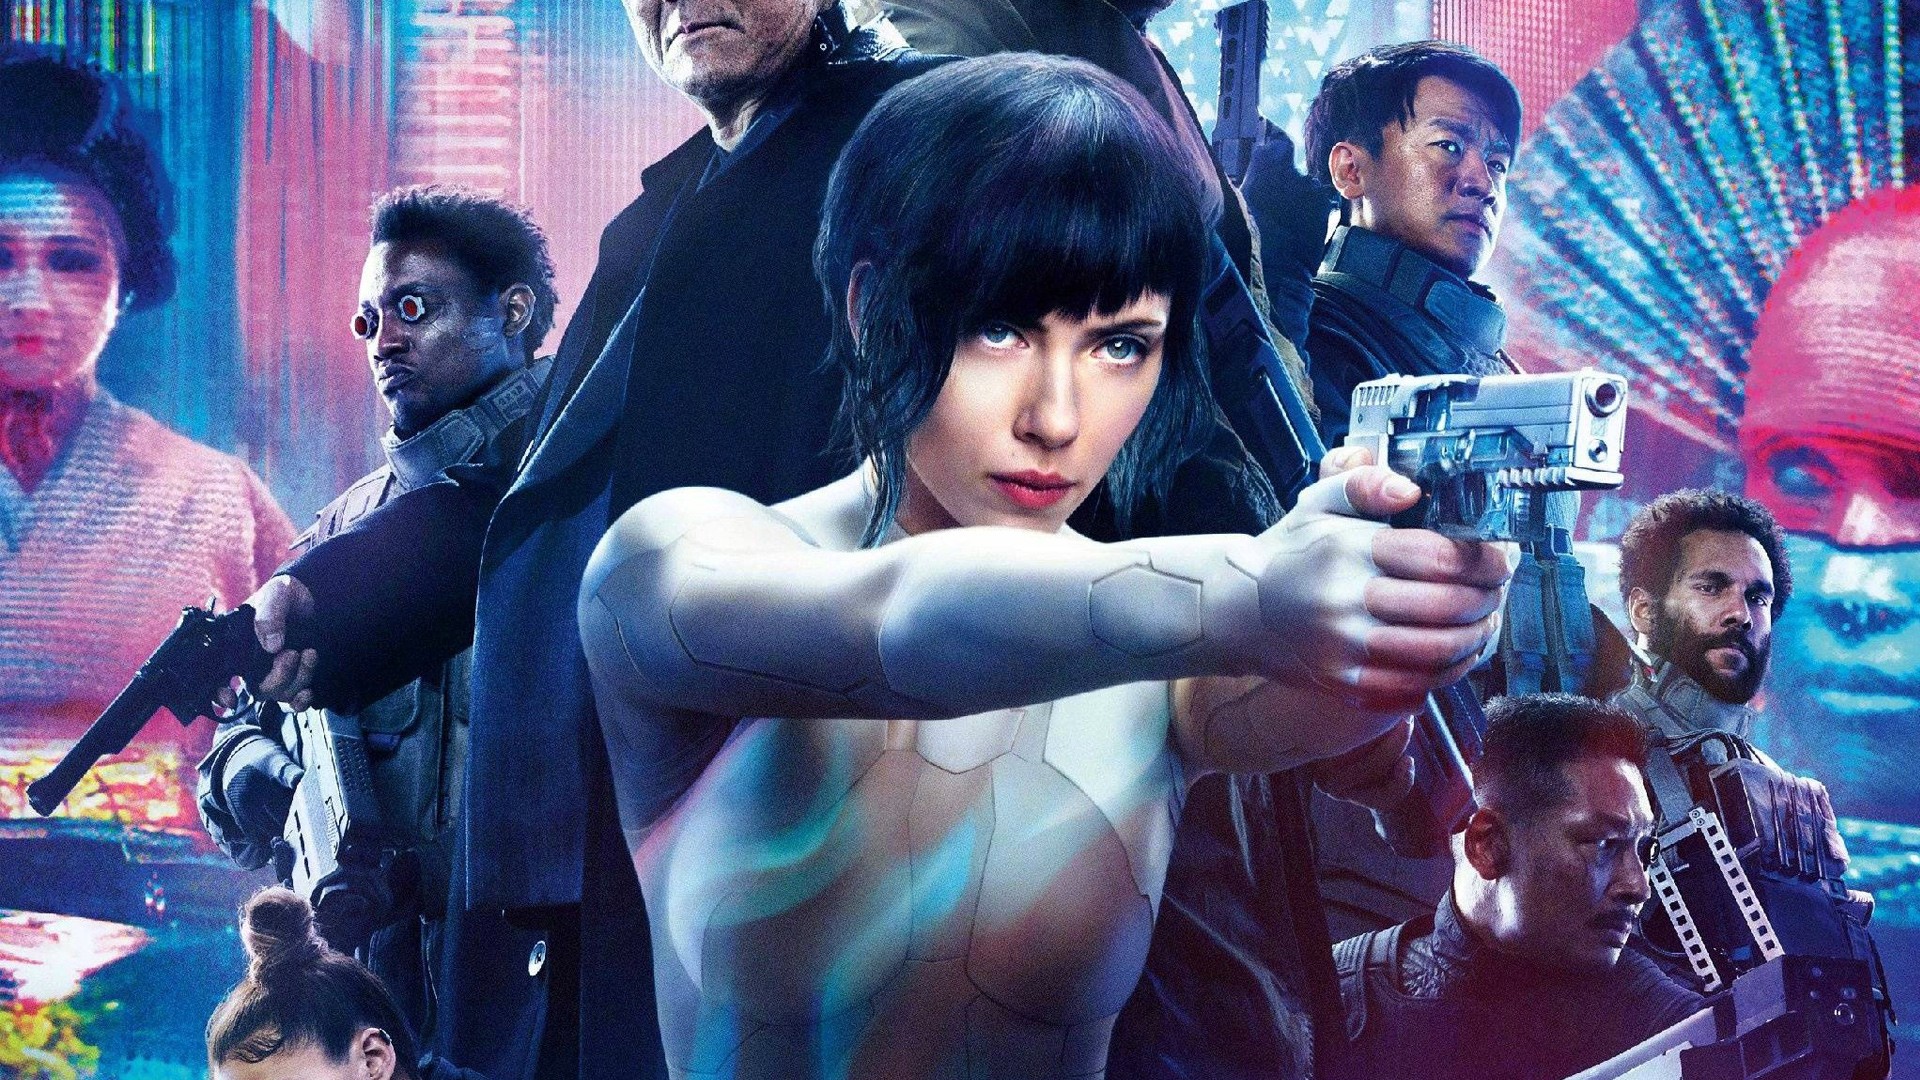 ghost in the shell wallpaper hd,movie,hero,cool,action film,photography